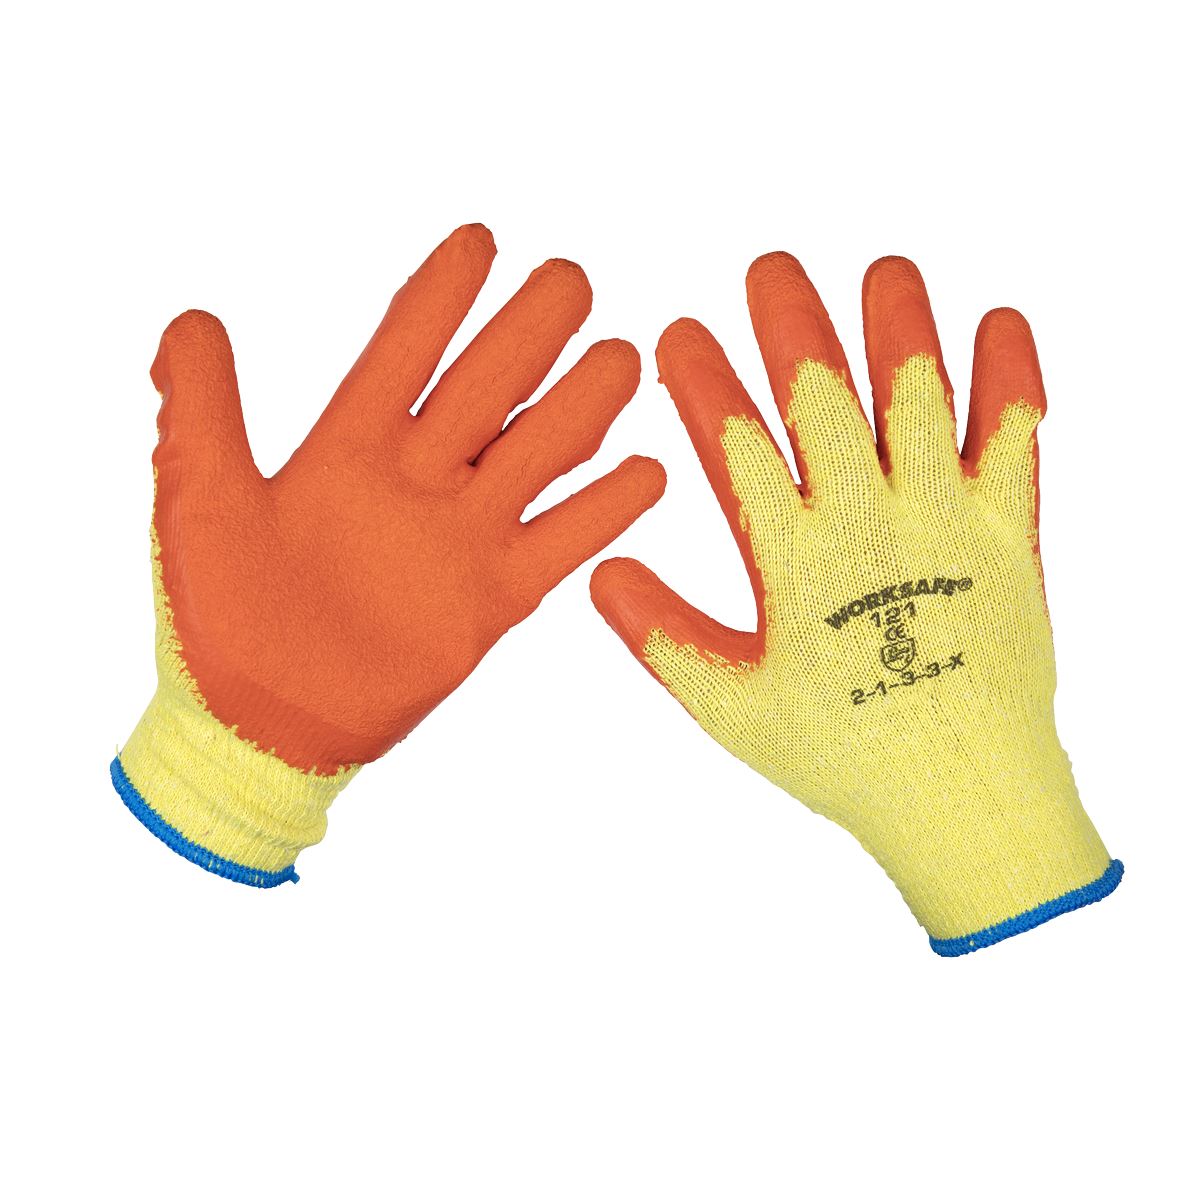 Worksafe by Sealey Super Grip Knitted Gloves Latex Palm (X-Large) - Pack of 6 Pairs